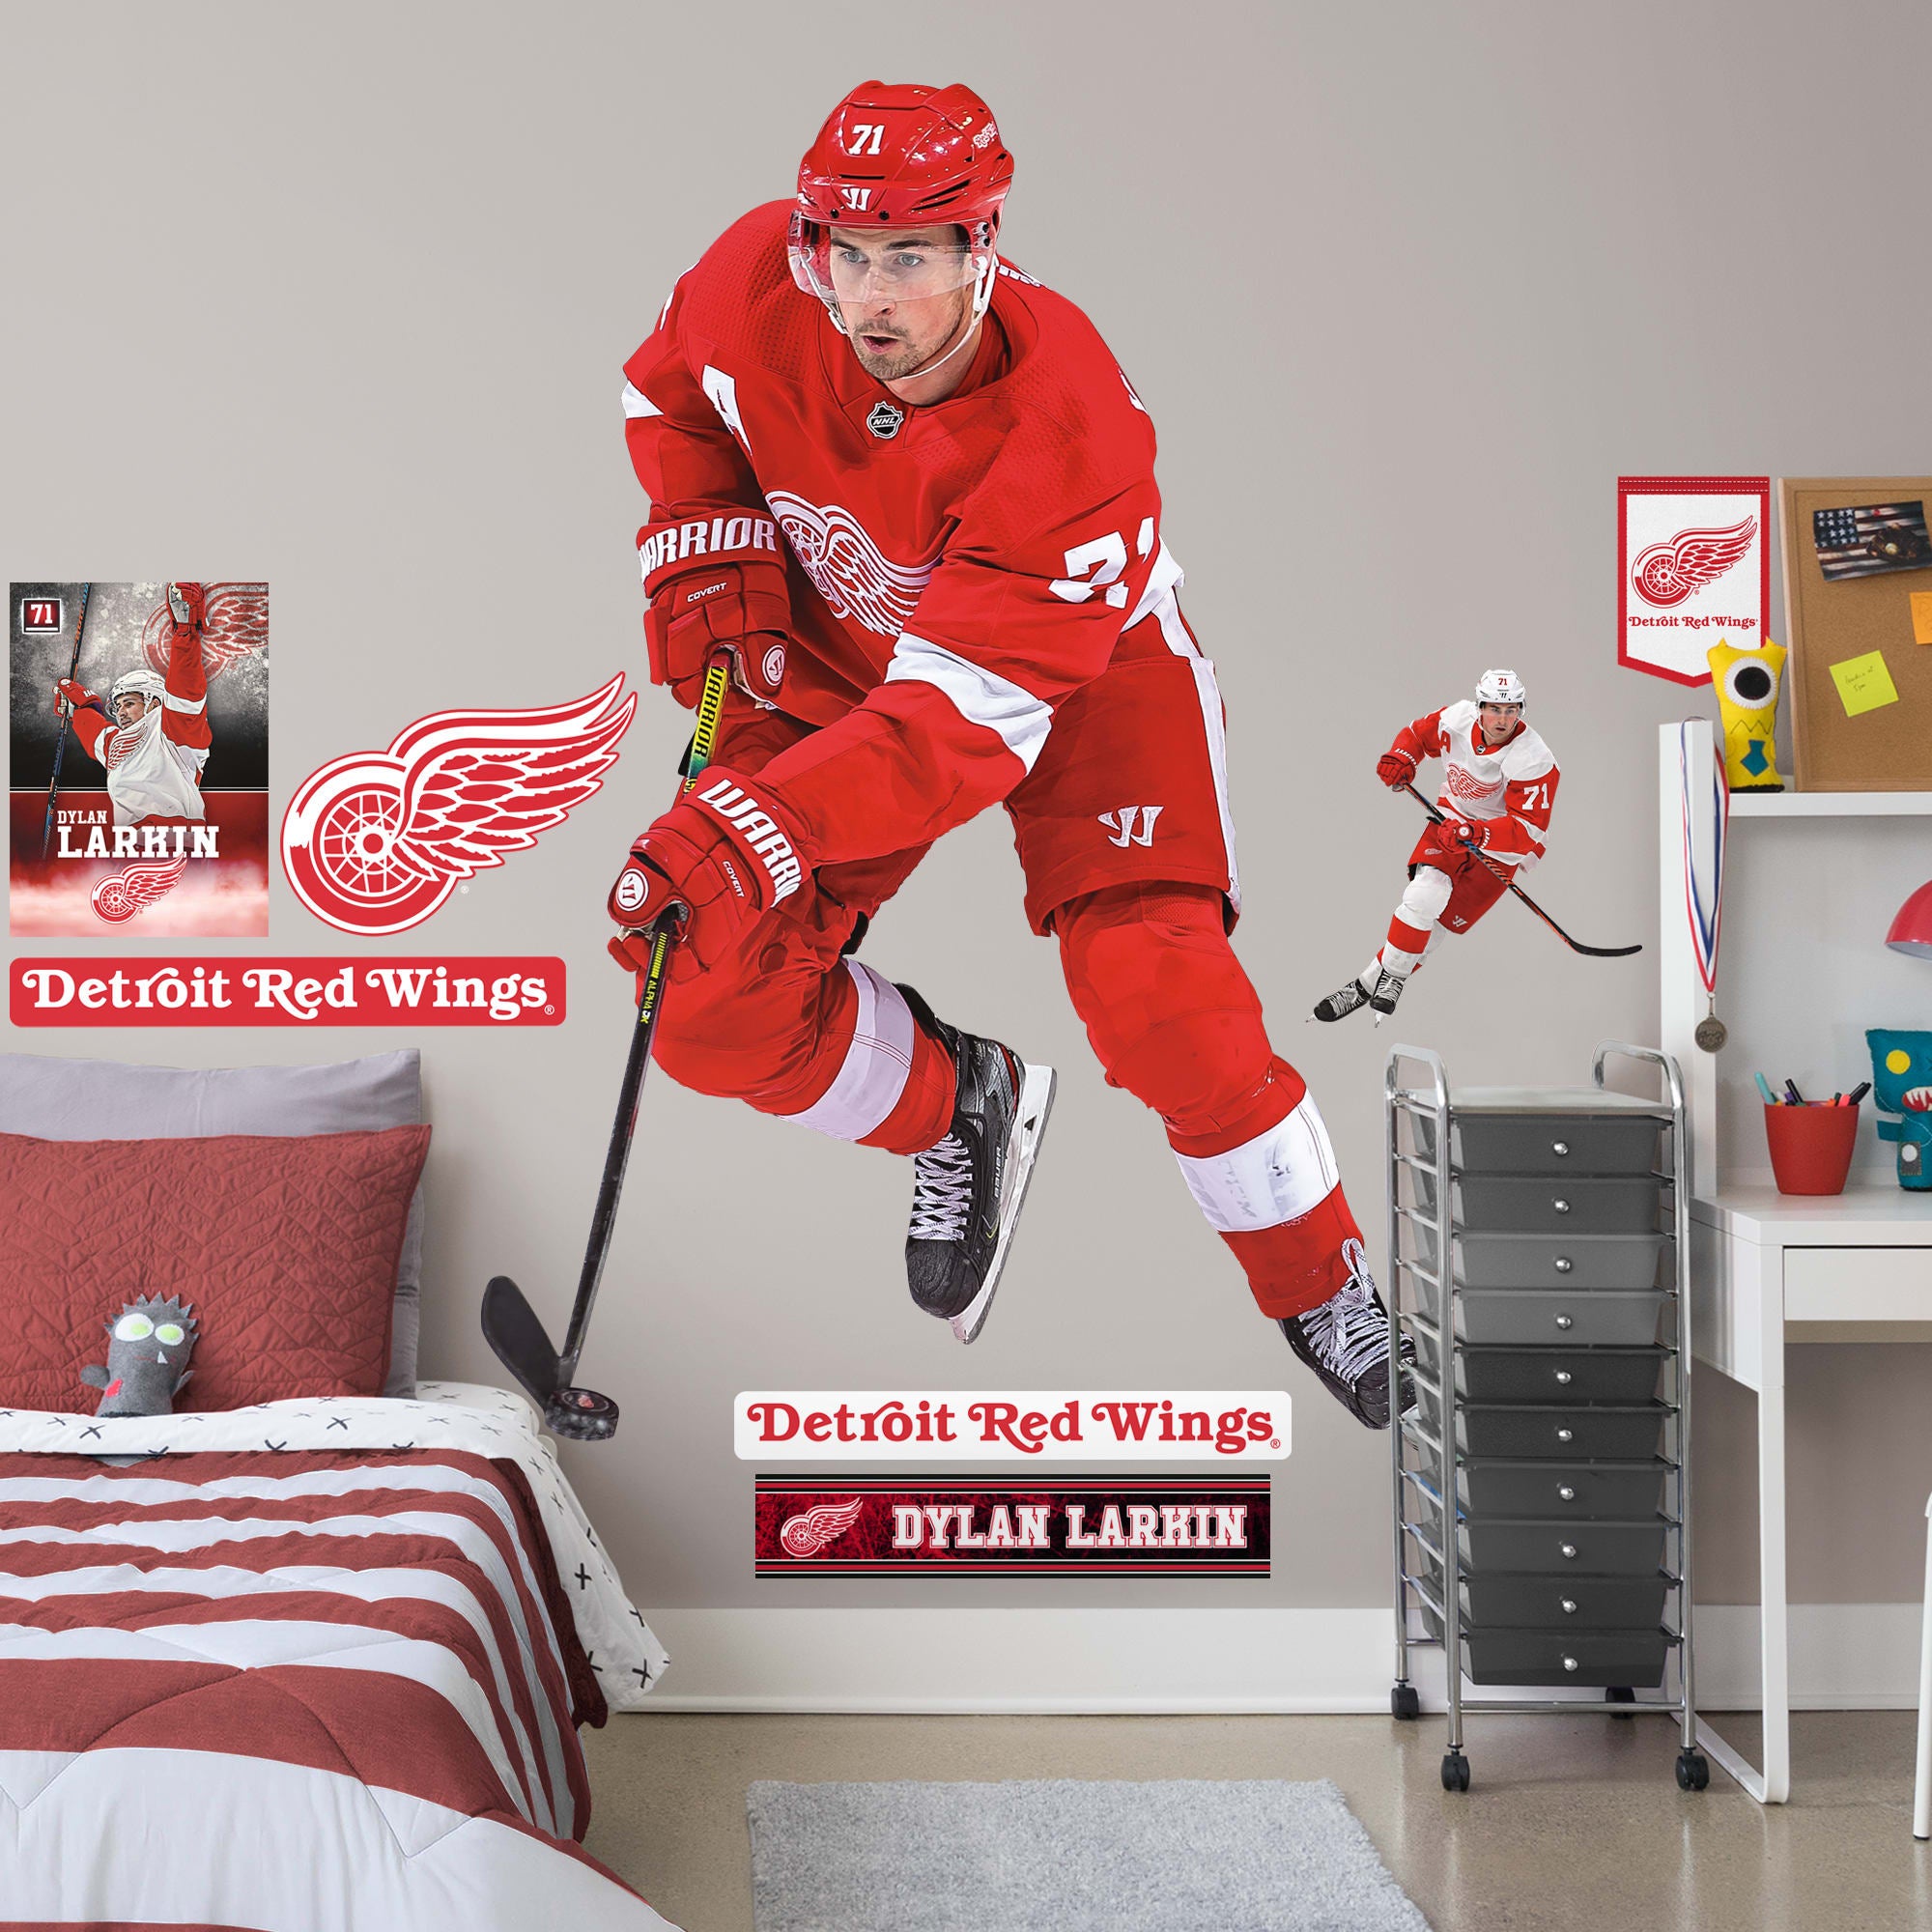 Detroit Red Wings Dylan Larkin 2021 - NHL Removable Wall Adhesive Wall Decal XL